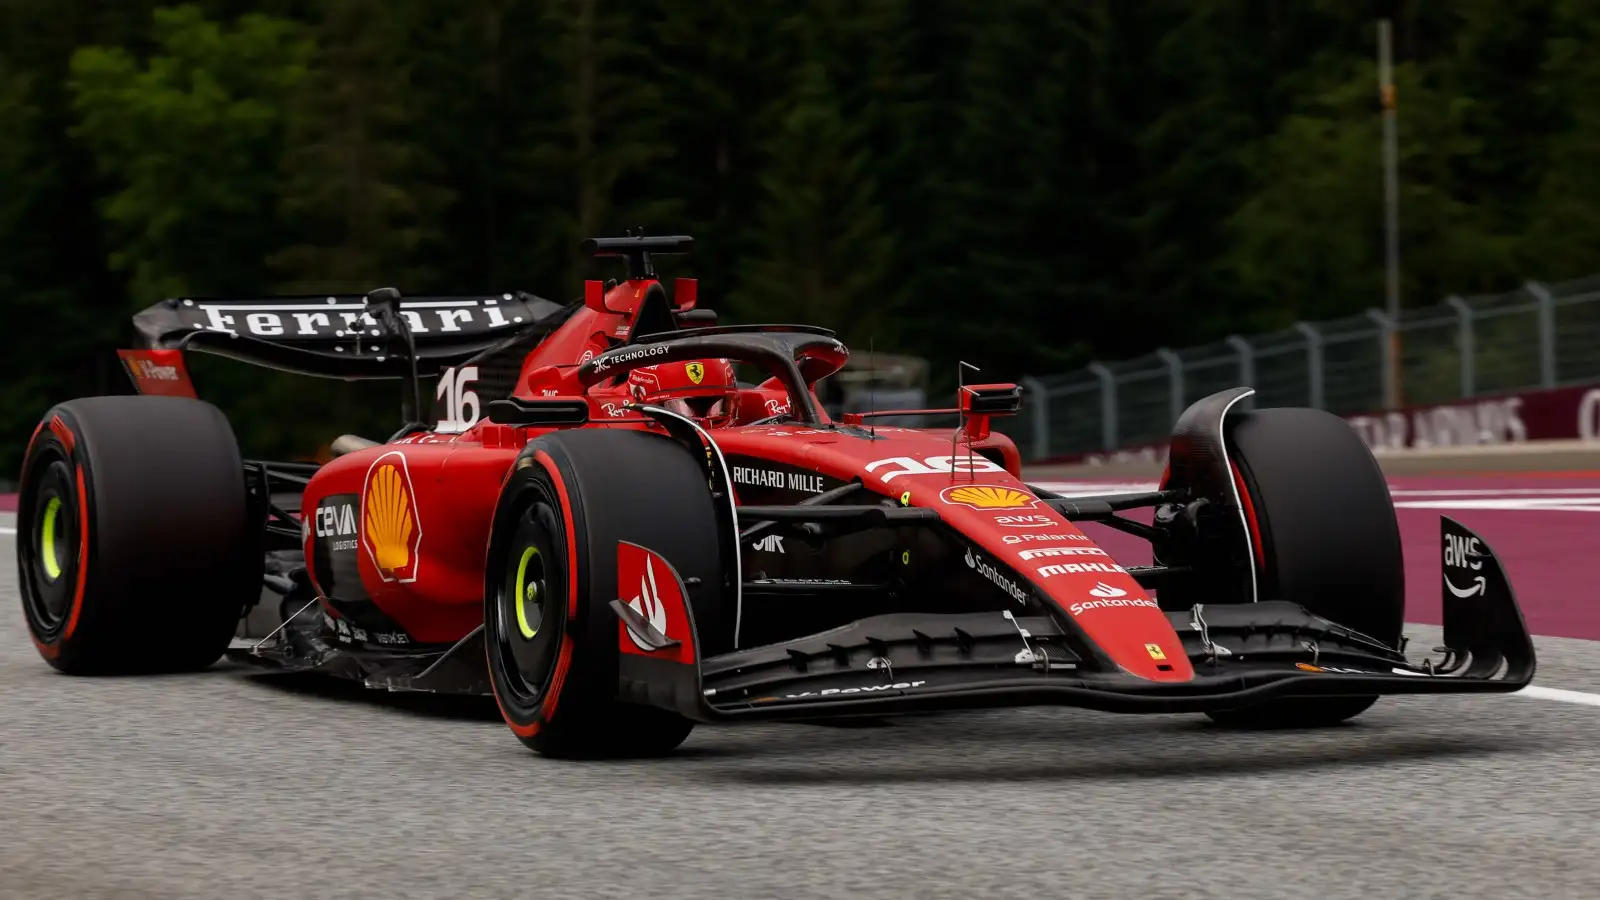 After playing F1 23 I dare say the cars feel much grippier than last year's